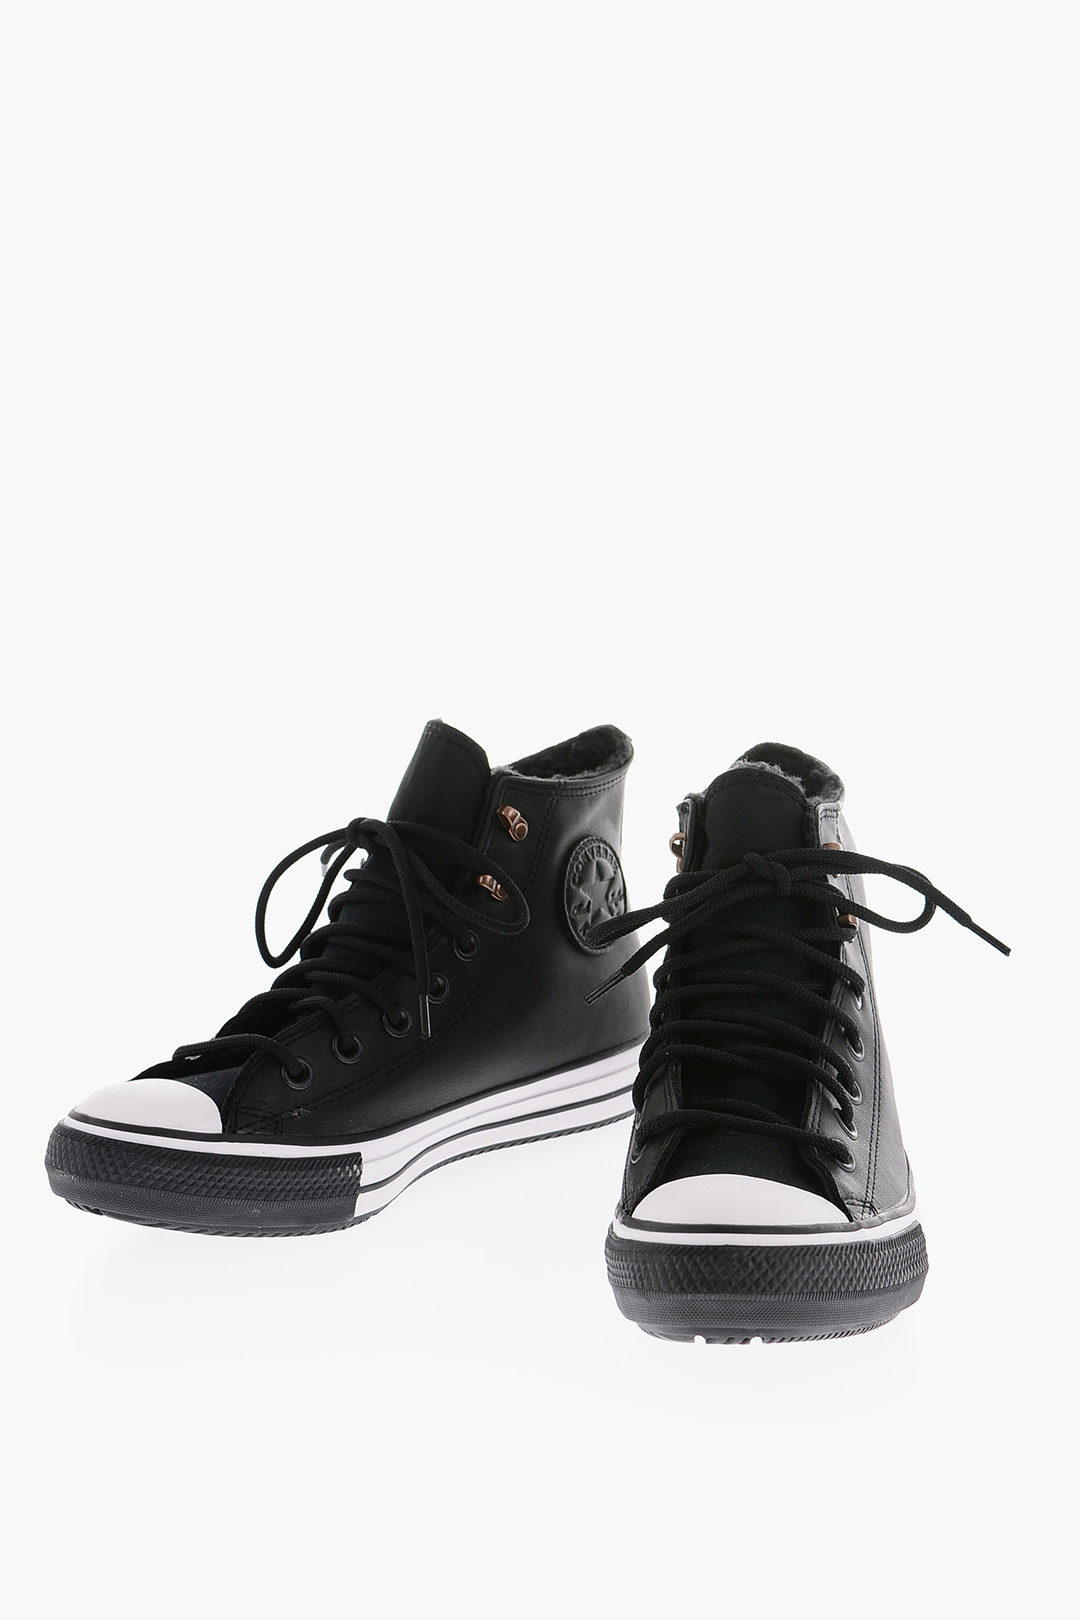 Converse CHUCK TAYLOR ALL STAR Faux Fur Intter High-Top Sneakers with Intarsio Logo men - Glamood